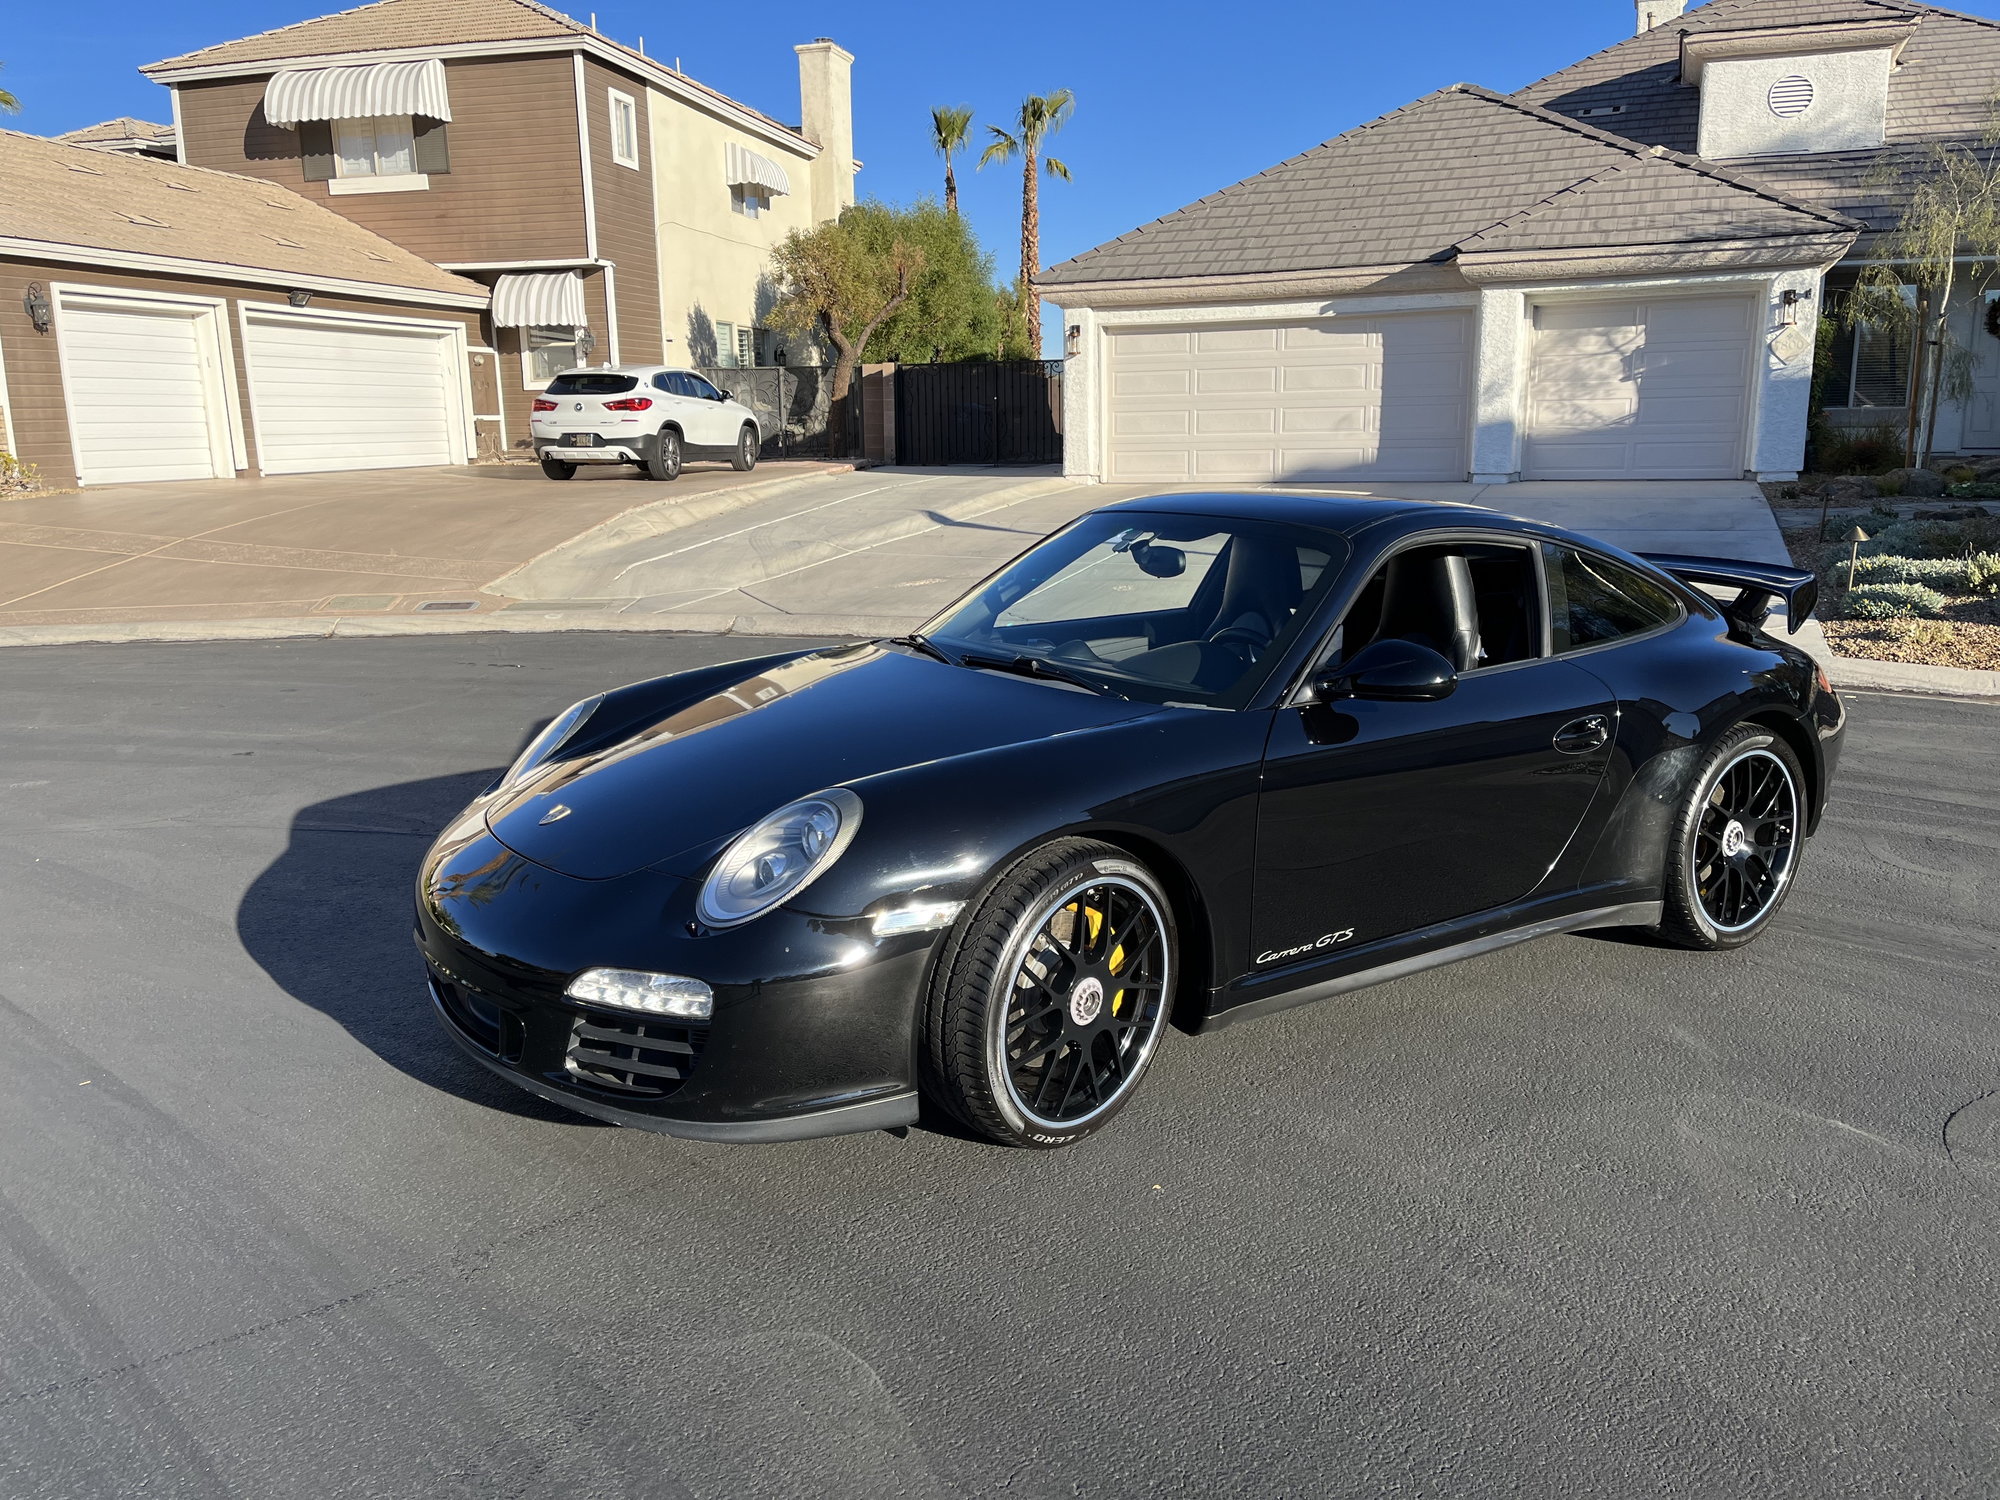 2012 Porsche 911 - 2012 997.2 Carrera GTS Manual Coupe - Used - VIN 123456789qwertypa - 52,000 Miles - 6 cyl - 2WD - Manual - Coupe - Black - Las Vegas, NV 89147, United States